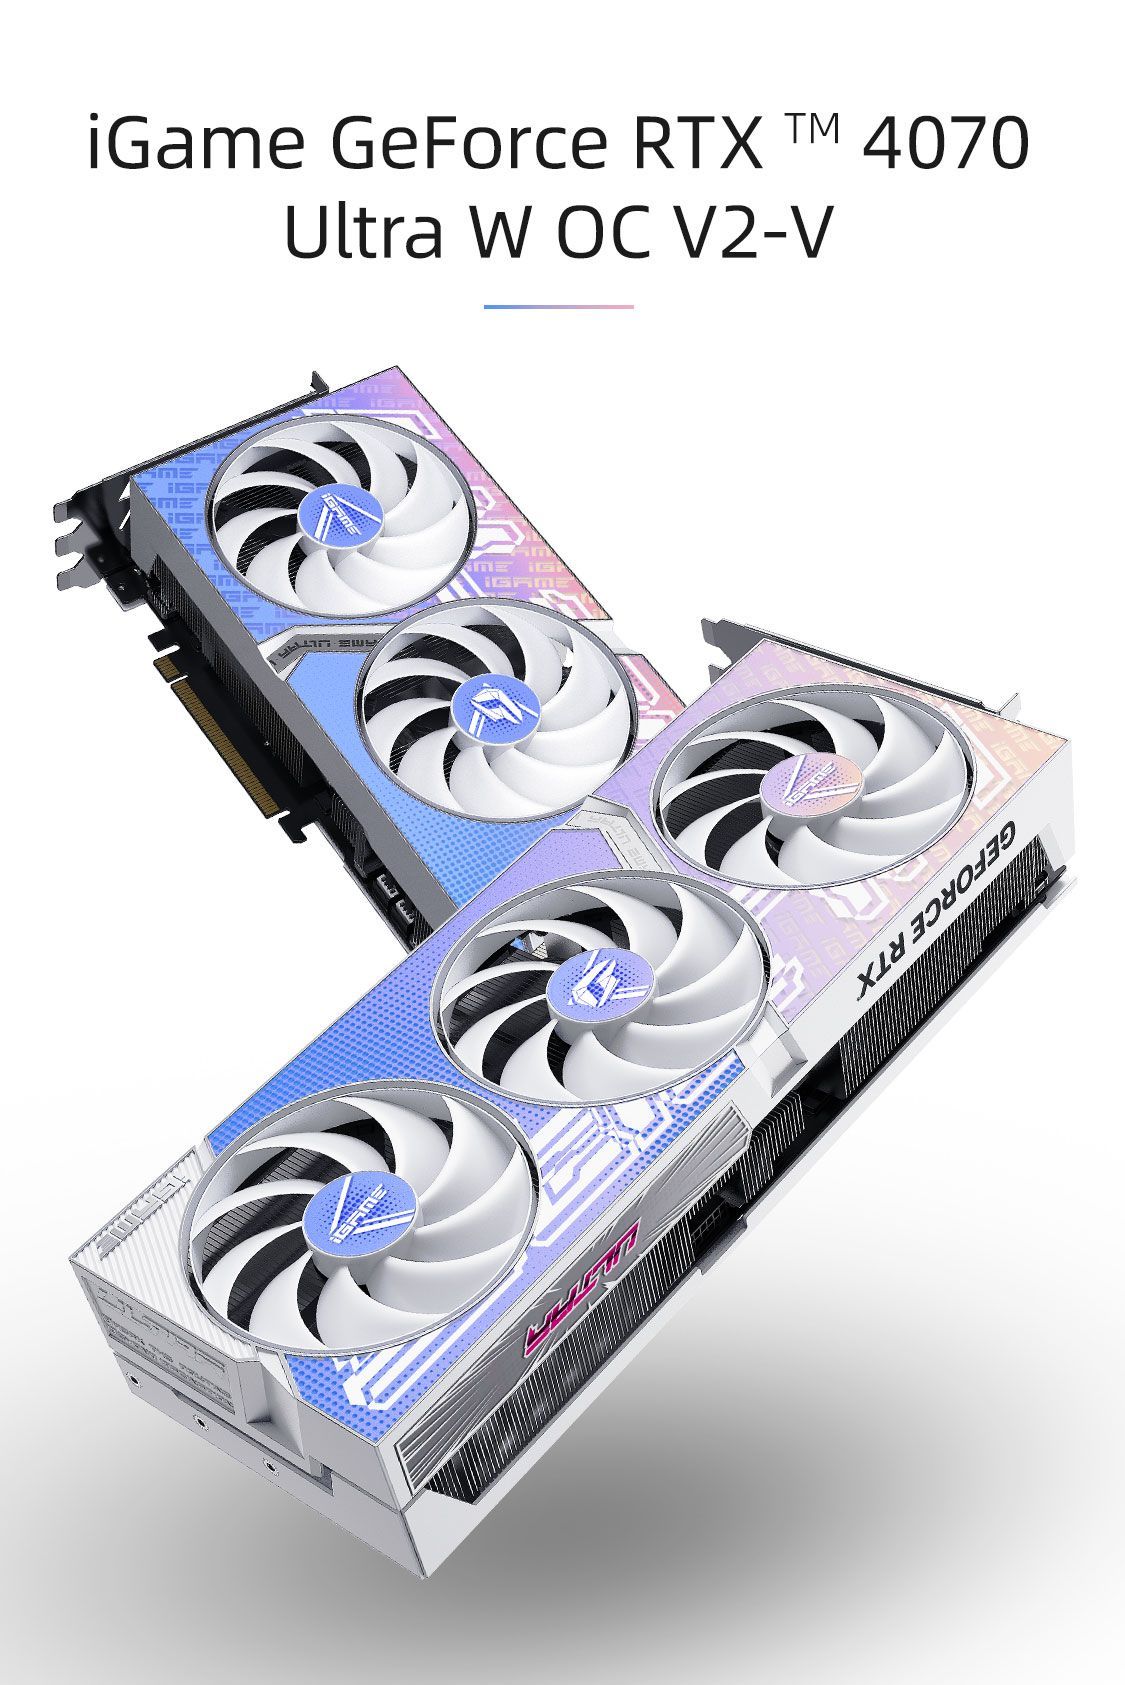 IGAME GEFORCE RTX 4070 ti Ultra w OC-V. RTX 4080 colorful IGAME. Colorful IGAME GEFORCE RTX 4080 16gb Ultra w OC-V. RTX 4080 colorful Ultra. Colorful ultra 4070